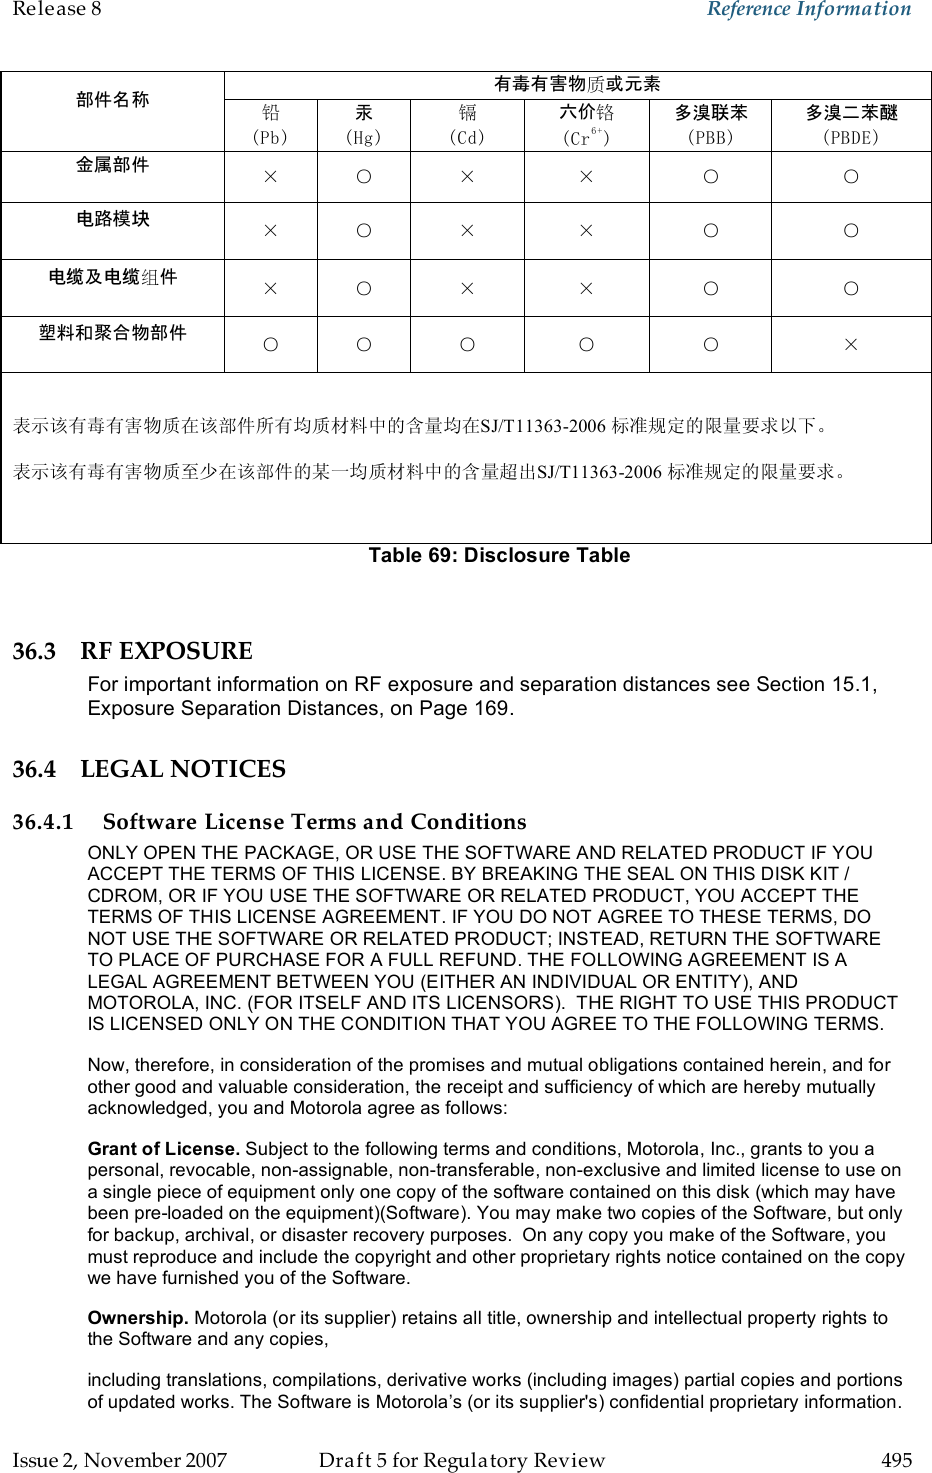 Release 8    Reference Information   Issue 2, November 2007  Draft 5 for Regulatory Review  495     Table 69: Disclosure Table  36.3 RF EXPOSURE For important information on RF exposure and separation distances see Section 15.1, Exposure Separation Distances, on Page 169. 36.4 LEGAL NOTICES 36.4.1 Software License Terms and Conditions ONLY OPEN THE PACKAGE, OR USE THE SOFTWARE AND RELATED PRODUCT IF YOU ACCEPT THE TERMS OF THIS LICENSE. BY BREAKING THE SEAL ON THIS DISK KIT / CDROM, OR IF YOU USE THE SOFTWARE OR RELATED PRODUCT, YOU ACCEPT THE TERMS OF THIS LICENSE AGREEMENT. IF YOU DO NOT AGREE TO THESE TERMS, DO NOT USE THE SOFTWARE OR RELATED PRODUCT; INSTEAD, RETURN THE SOFTWARE TO PLACE OF PURCHASE FOR A FULL REFUND. THE FOLLOWING AGREEMENT IS A LEGAL AGREEMENT BETWEEN YOU (EITHER AN INDIVIDUAL OR ENTITY), AND MOTOROLA, INC. (FOR ITSELF AND ITS LICENSORS).  THE RIGHT TO USE THIS PRODUCT IS LICENSED ONLY ON THE CONDITION THAT YOU AGREE TO THE FOLLOWING TERMS.   Now, therefore, in consideration of the promises and mutual obligations contained herein, and for other good and valuable consideration, the receipt and sufficiency of which are hereby mutually acknowledged, you and Motorola agree as follows: Grant of License. Subject to the following terms and conditions, Motorola, Inc., grants to you a personal, revocable, non-assignable, non-transferable, non-exclusive and limited license to use on a single piece of equipment only one copy of the software contained on this disk (which may have been pre-loaded on the equipment)(Software). You may make two copies of the Software, but only for backup, archival, or disaster recovery purposes.  On any copy you make of the Software, you must reproduce and include the copyright and other proprietary rights notice contained on the copy we have furnished you of the Software. Ownership. Motorola (or its supplier) retains all title, ownership and intellectual property rights to the Software and any copies,  including translations, compilations, derivative works (including images) partial copies and portions of updated works. The Software is Motorola’s (or its supplier&apos;s) confidential proprietary information. 有毒有害物质或元素  部件名称  铅 (Pb) 汞 (Hg) 镉 (Cd) 六价铬 (Cr6+) 多溴联苯 (PBB) 多溴二苯醚 (PBDE) 金属部件  × ○ × × ○ ○ 电路模块  × ○ × × ○ ○ 电缆及电缆组件  × ○ × × ○ ○ 塑料和聚合物部件  ○ ○ ○ ○ ○ ×  ○： 表示该有毒有害物质在该部件所有均质材料中的含量均在SJ/T11363-2006 标准规定的限量要求以下。       ×： 表示该有毒有害物质至少在该部件的某一均质材料中的含量超出SJ/T11363-2006 标准规定的限量要求。    